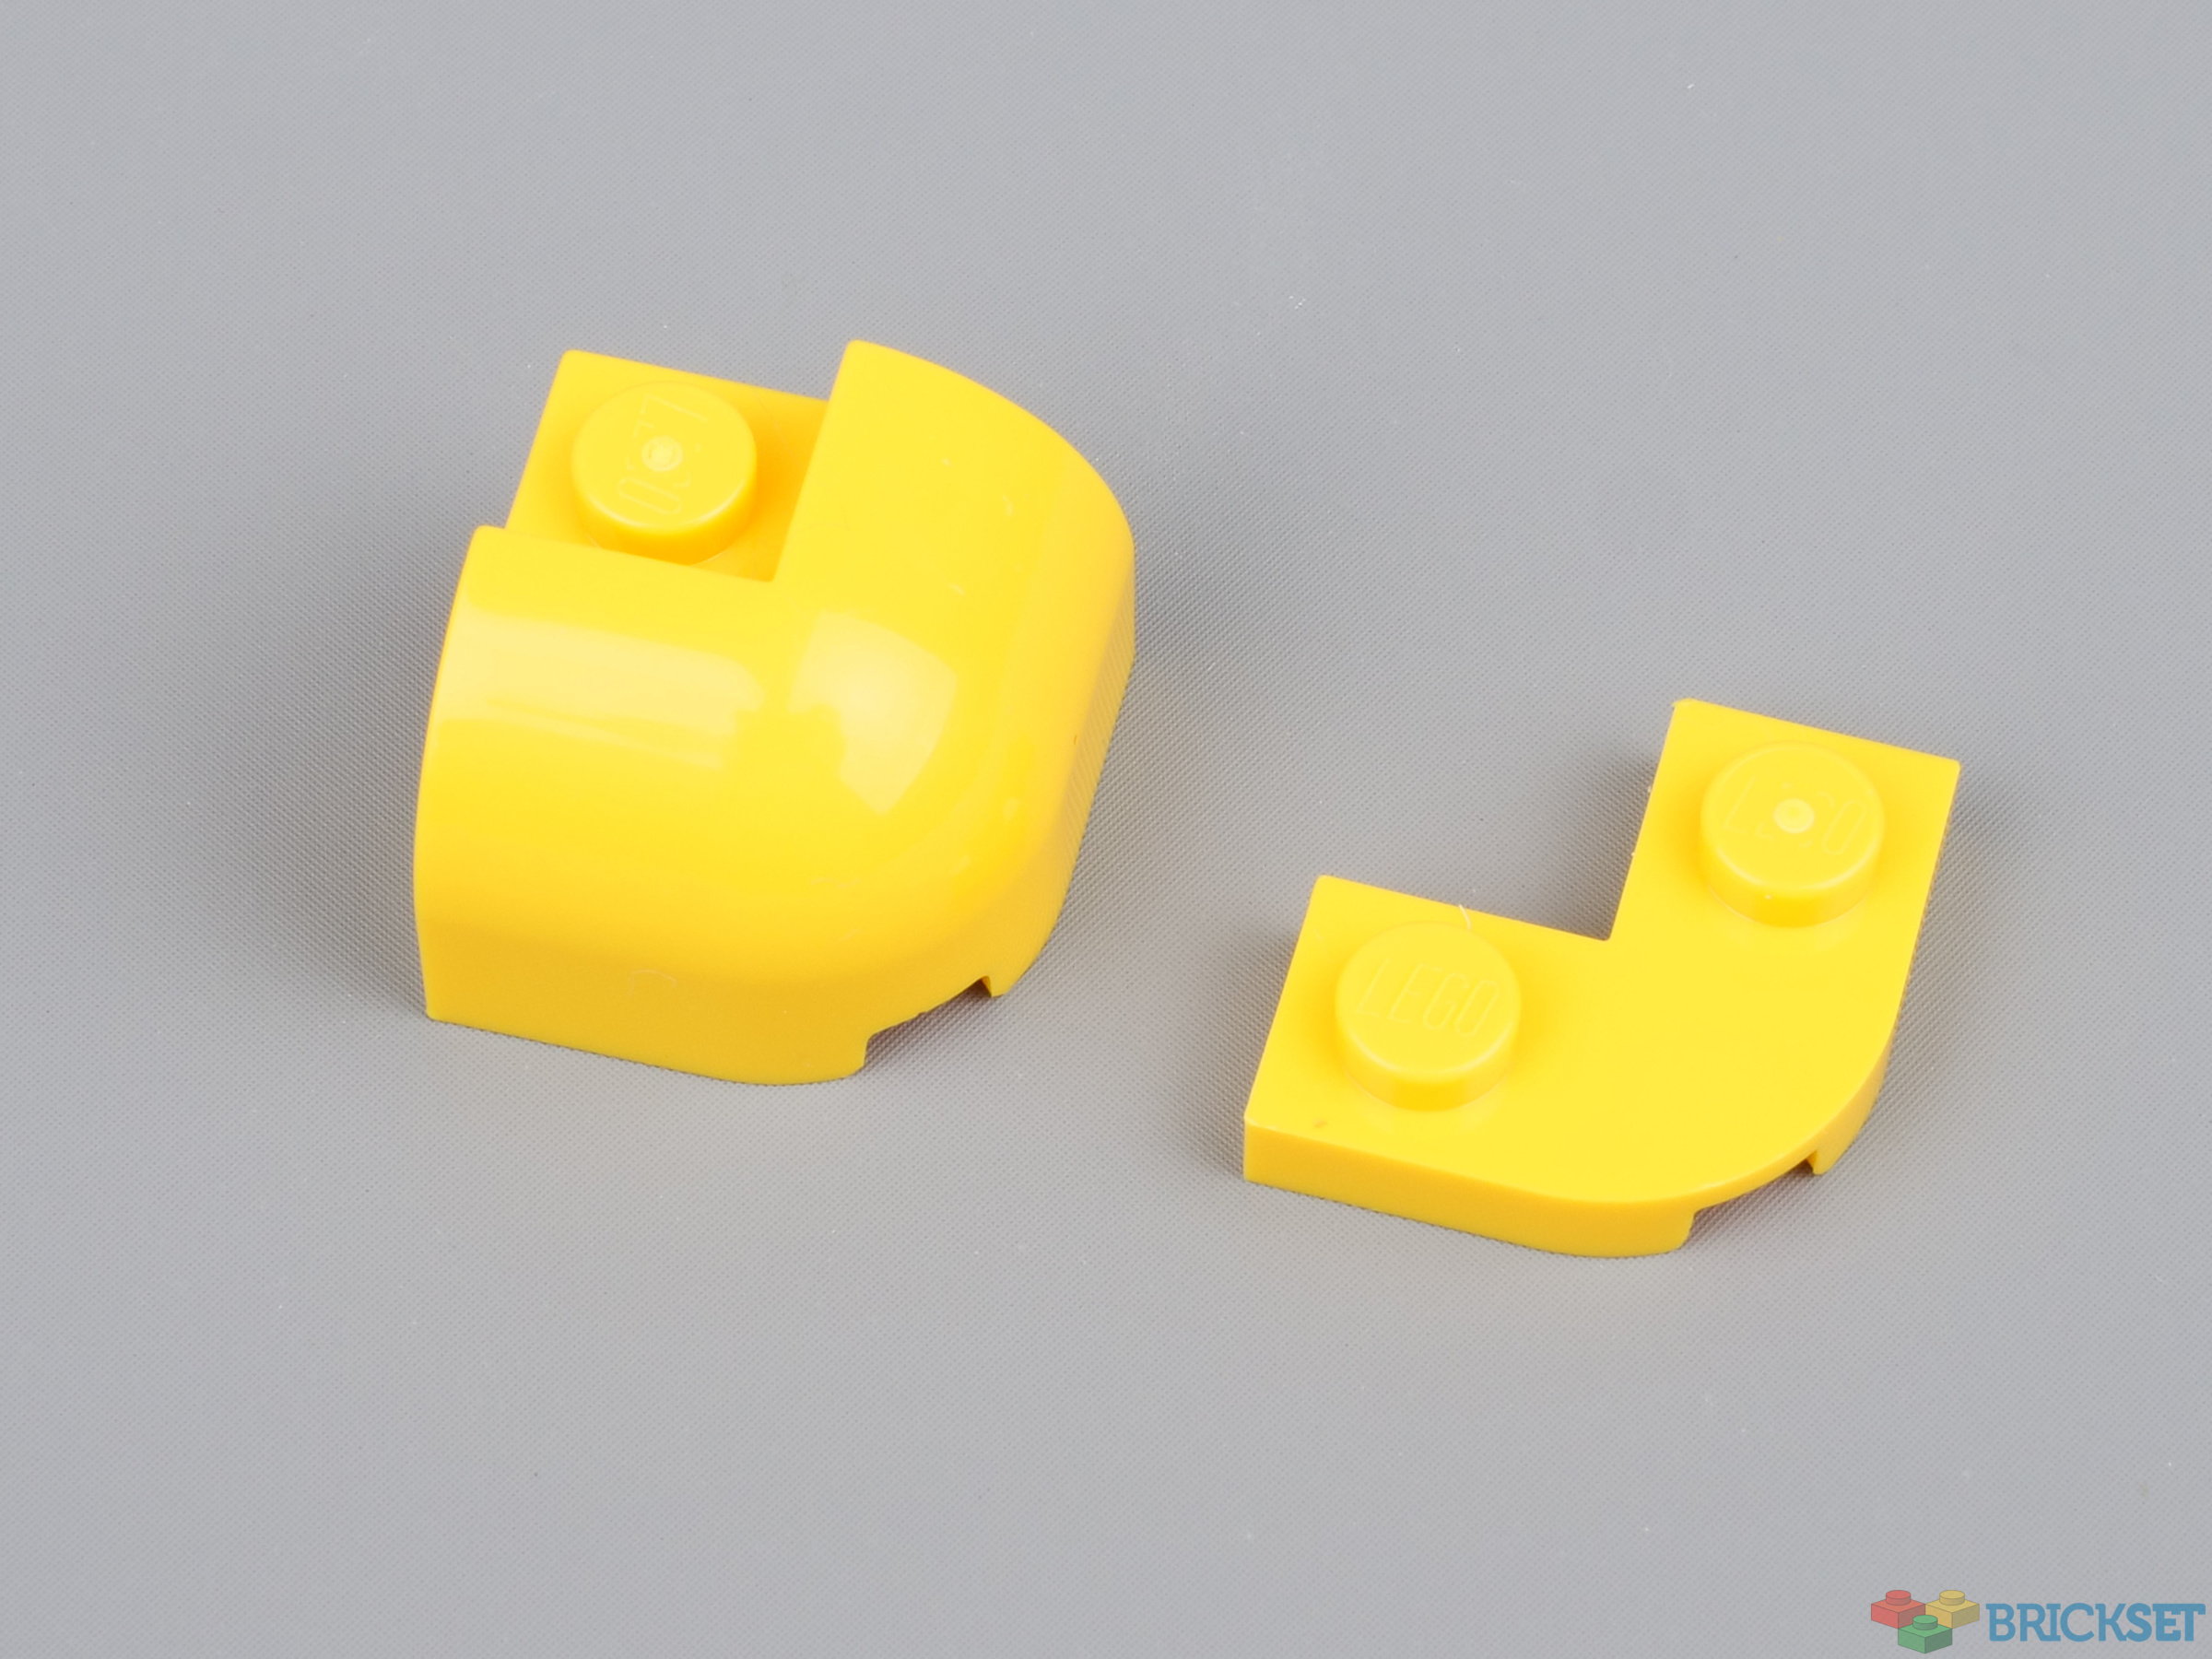 New LEGO Lot of 8 Yellow 2x2 Plate Building Parts and Pieces